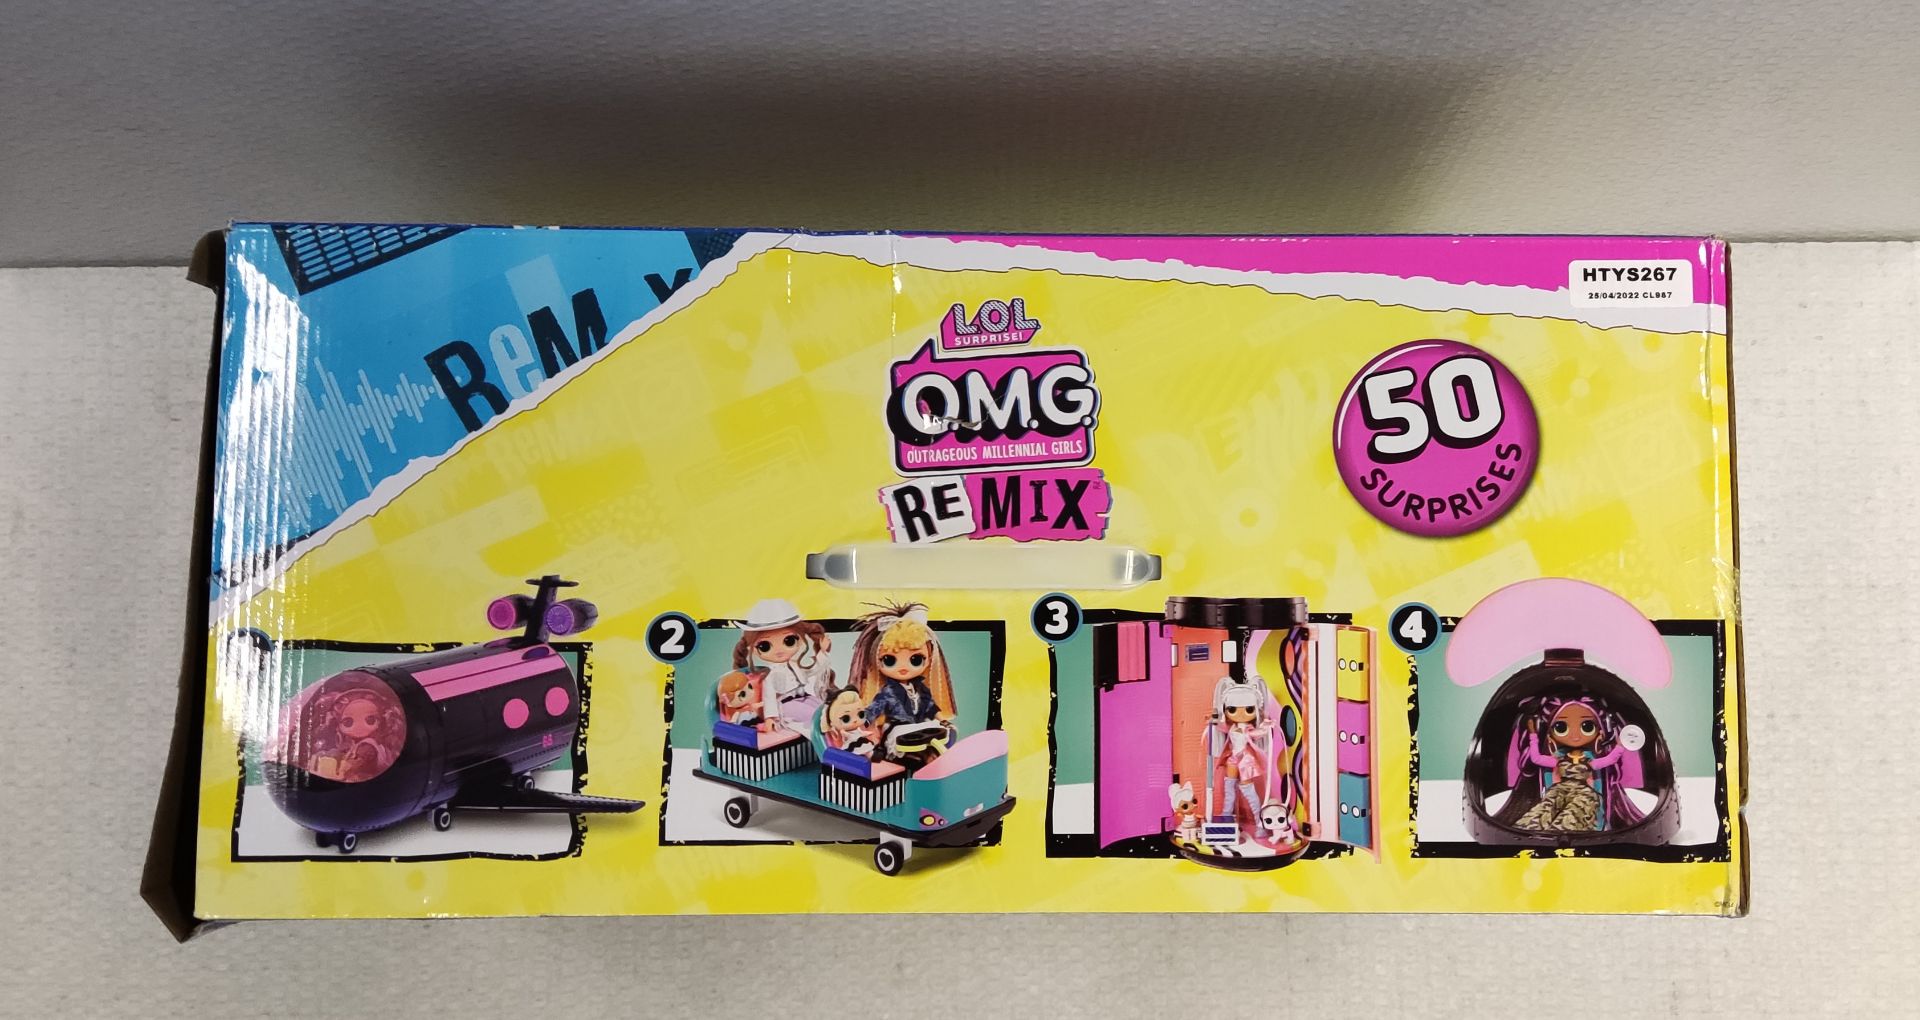 1 x LOL Surprise OMG Remix 4 in 1 Plane Playset - New/Boxed - Image 3 of 7